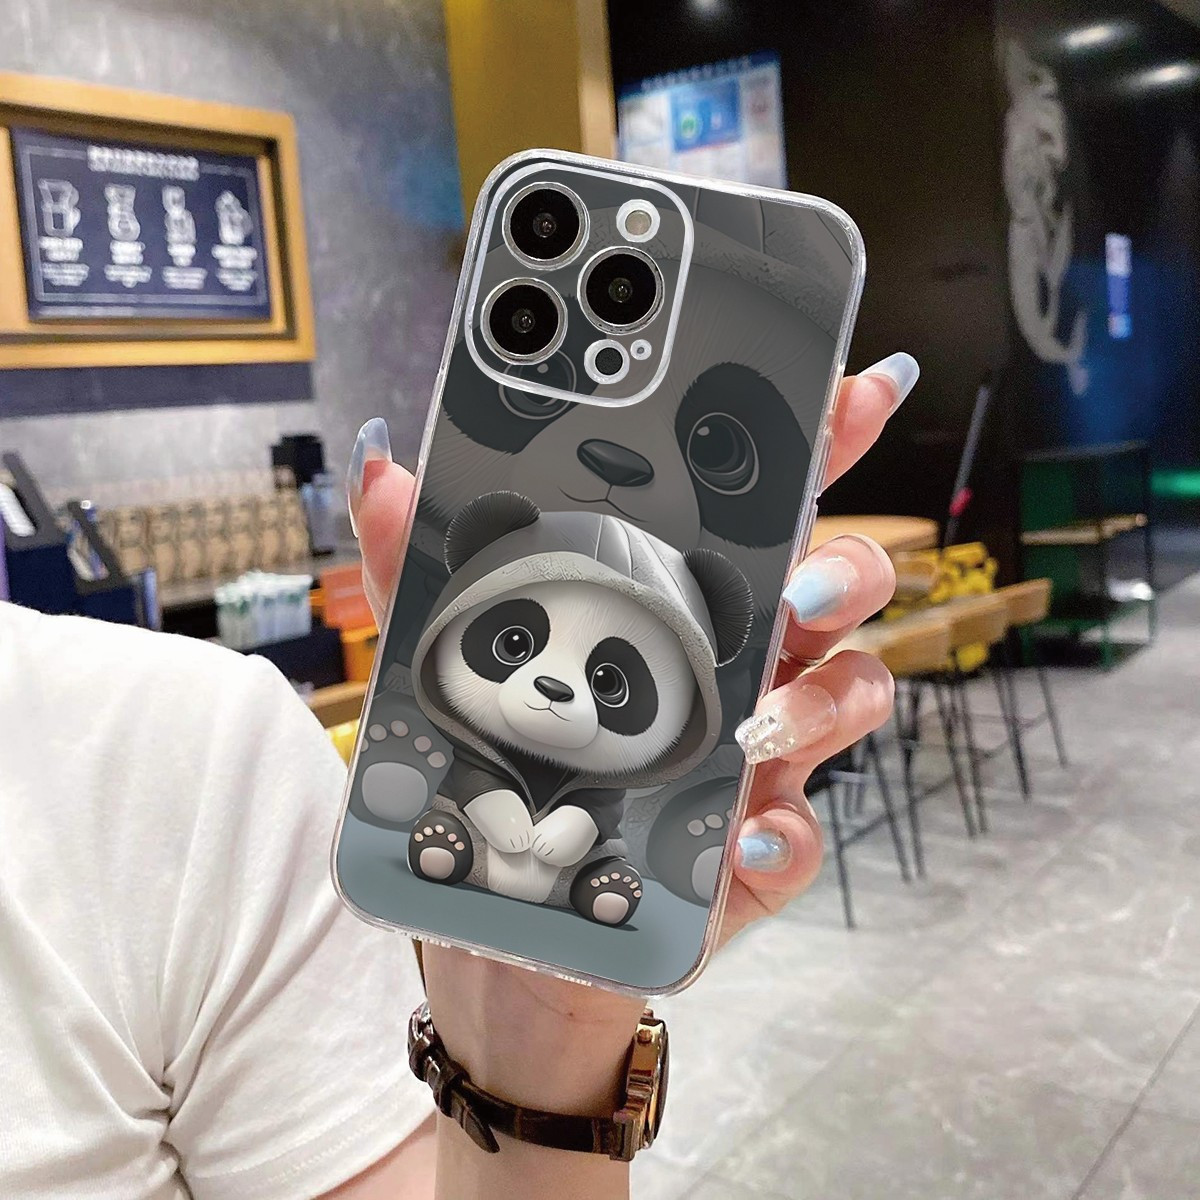 

3d Panda Pattern Print Tpu Protective Phone Case Anti-fall Protective Phone Case For Iphone 7/8/11/12/13/14/x/xr/xs/plus/pro/pro Max Series Gift For Birthday/easter/boy/girlfriends